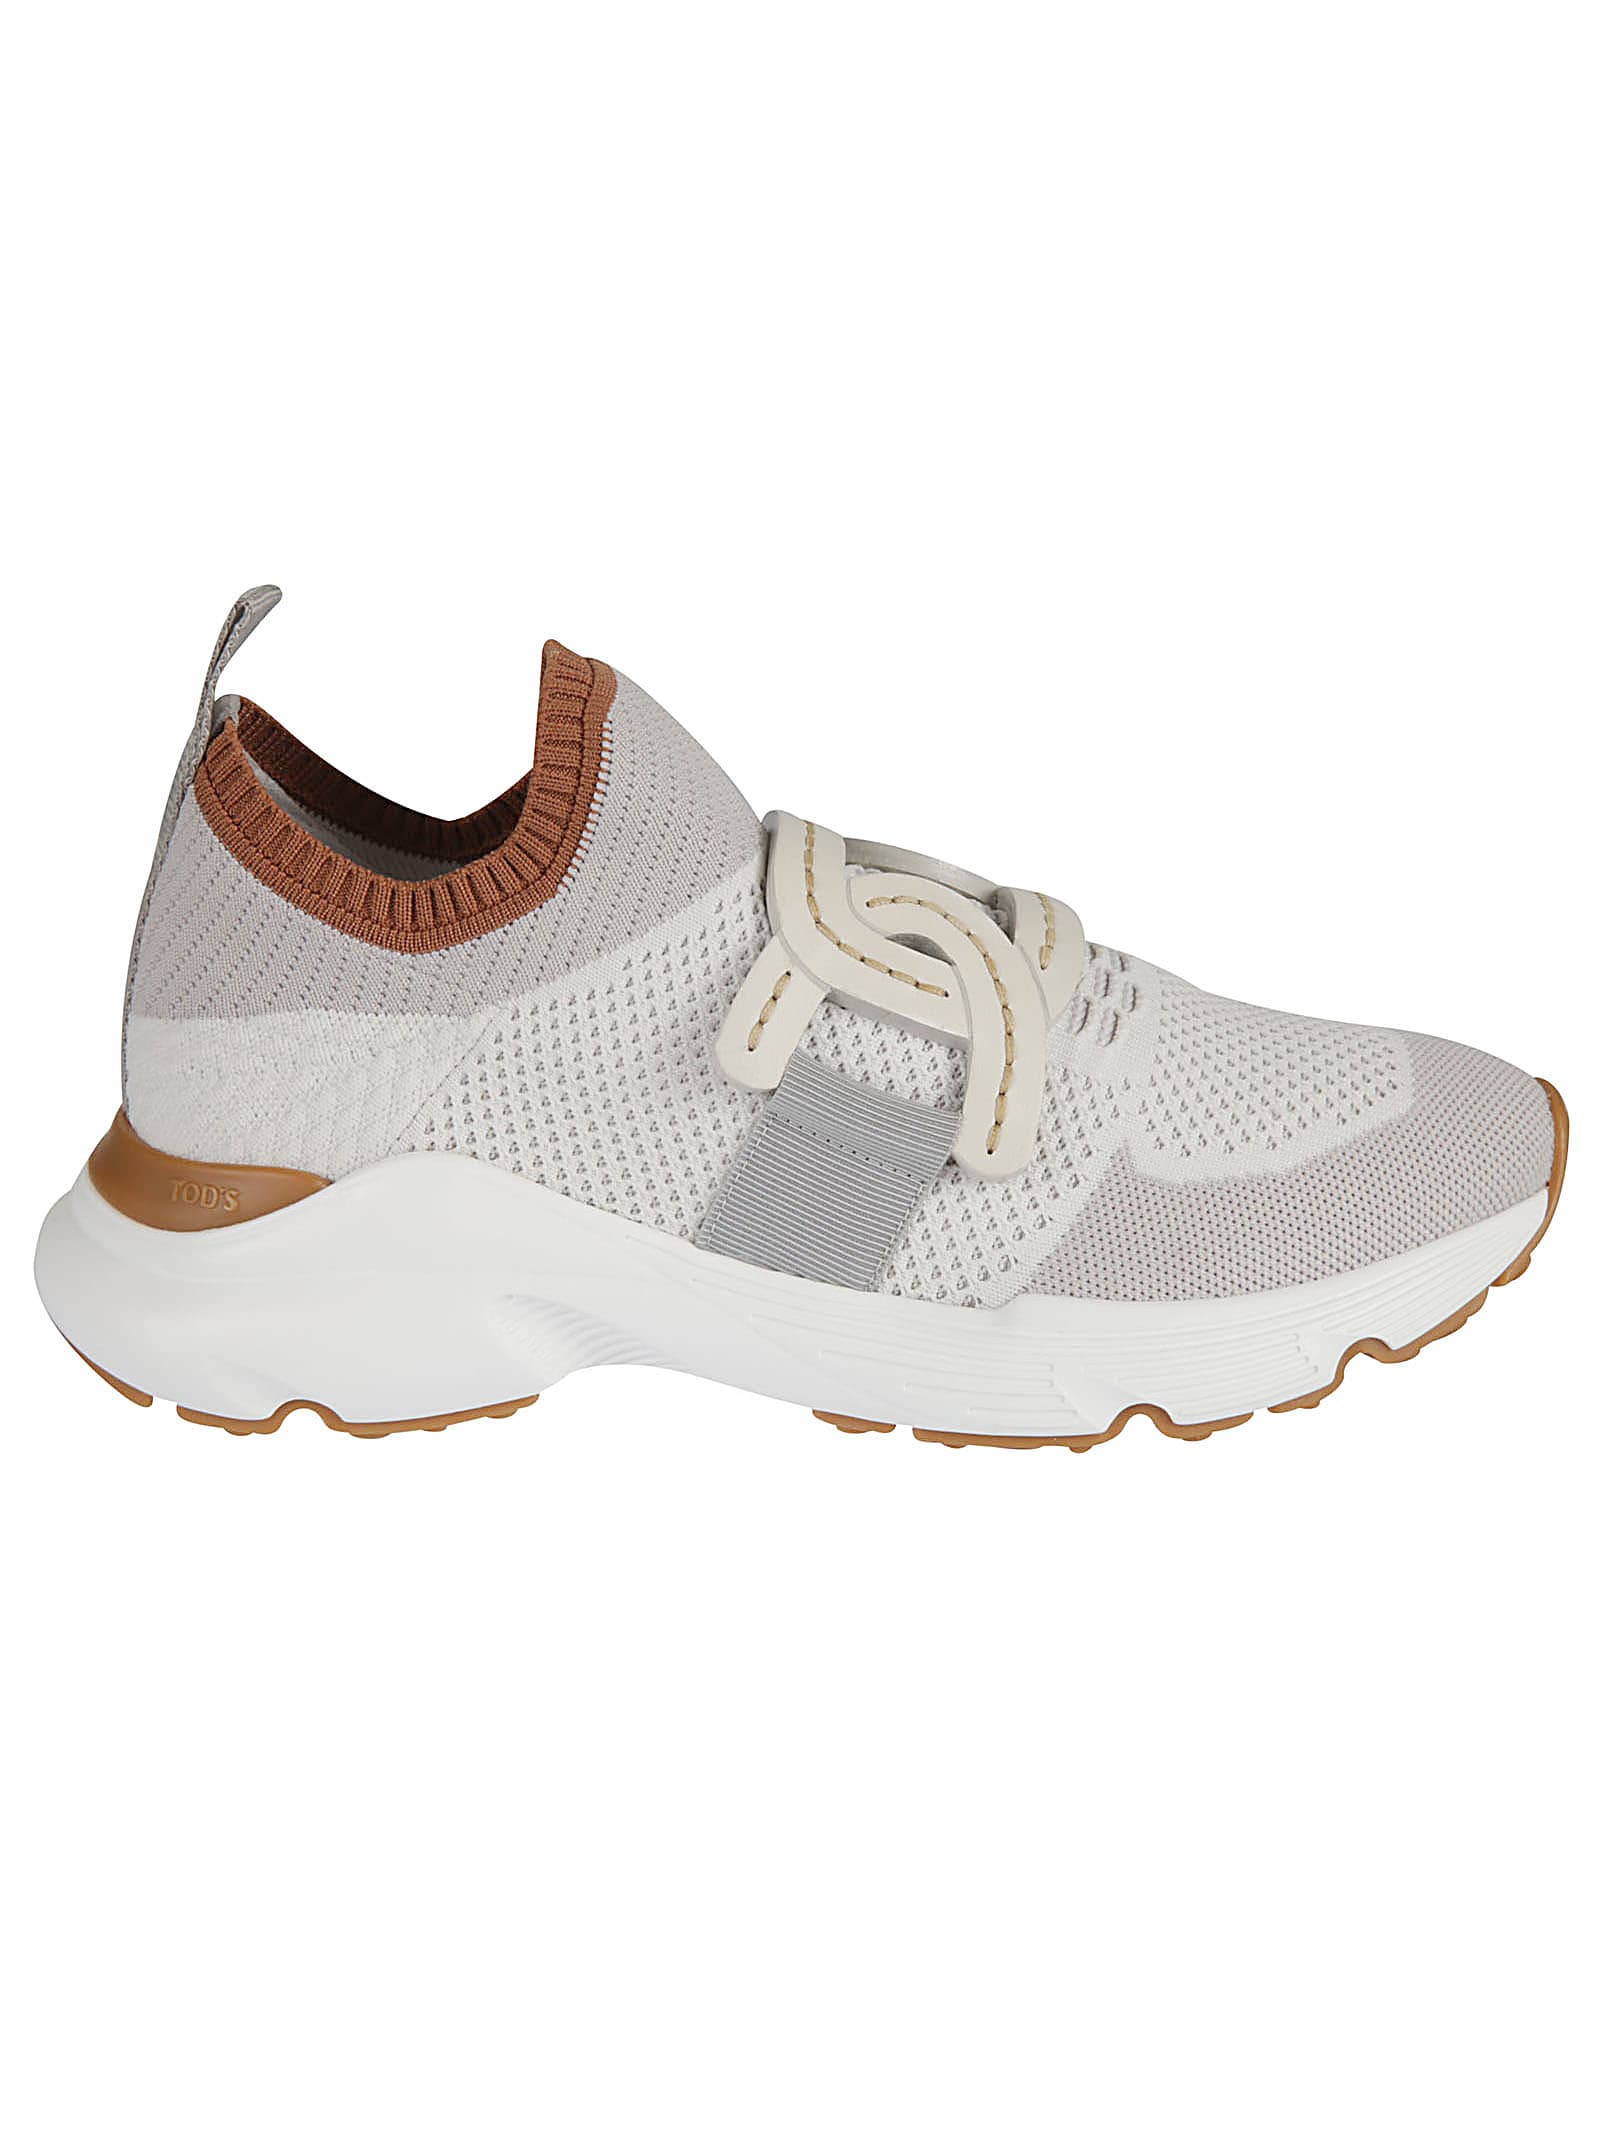 Buy Tods 54c Sport Run Sneakers online, shop Tods shoes with free shipping